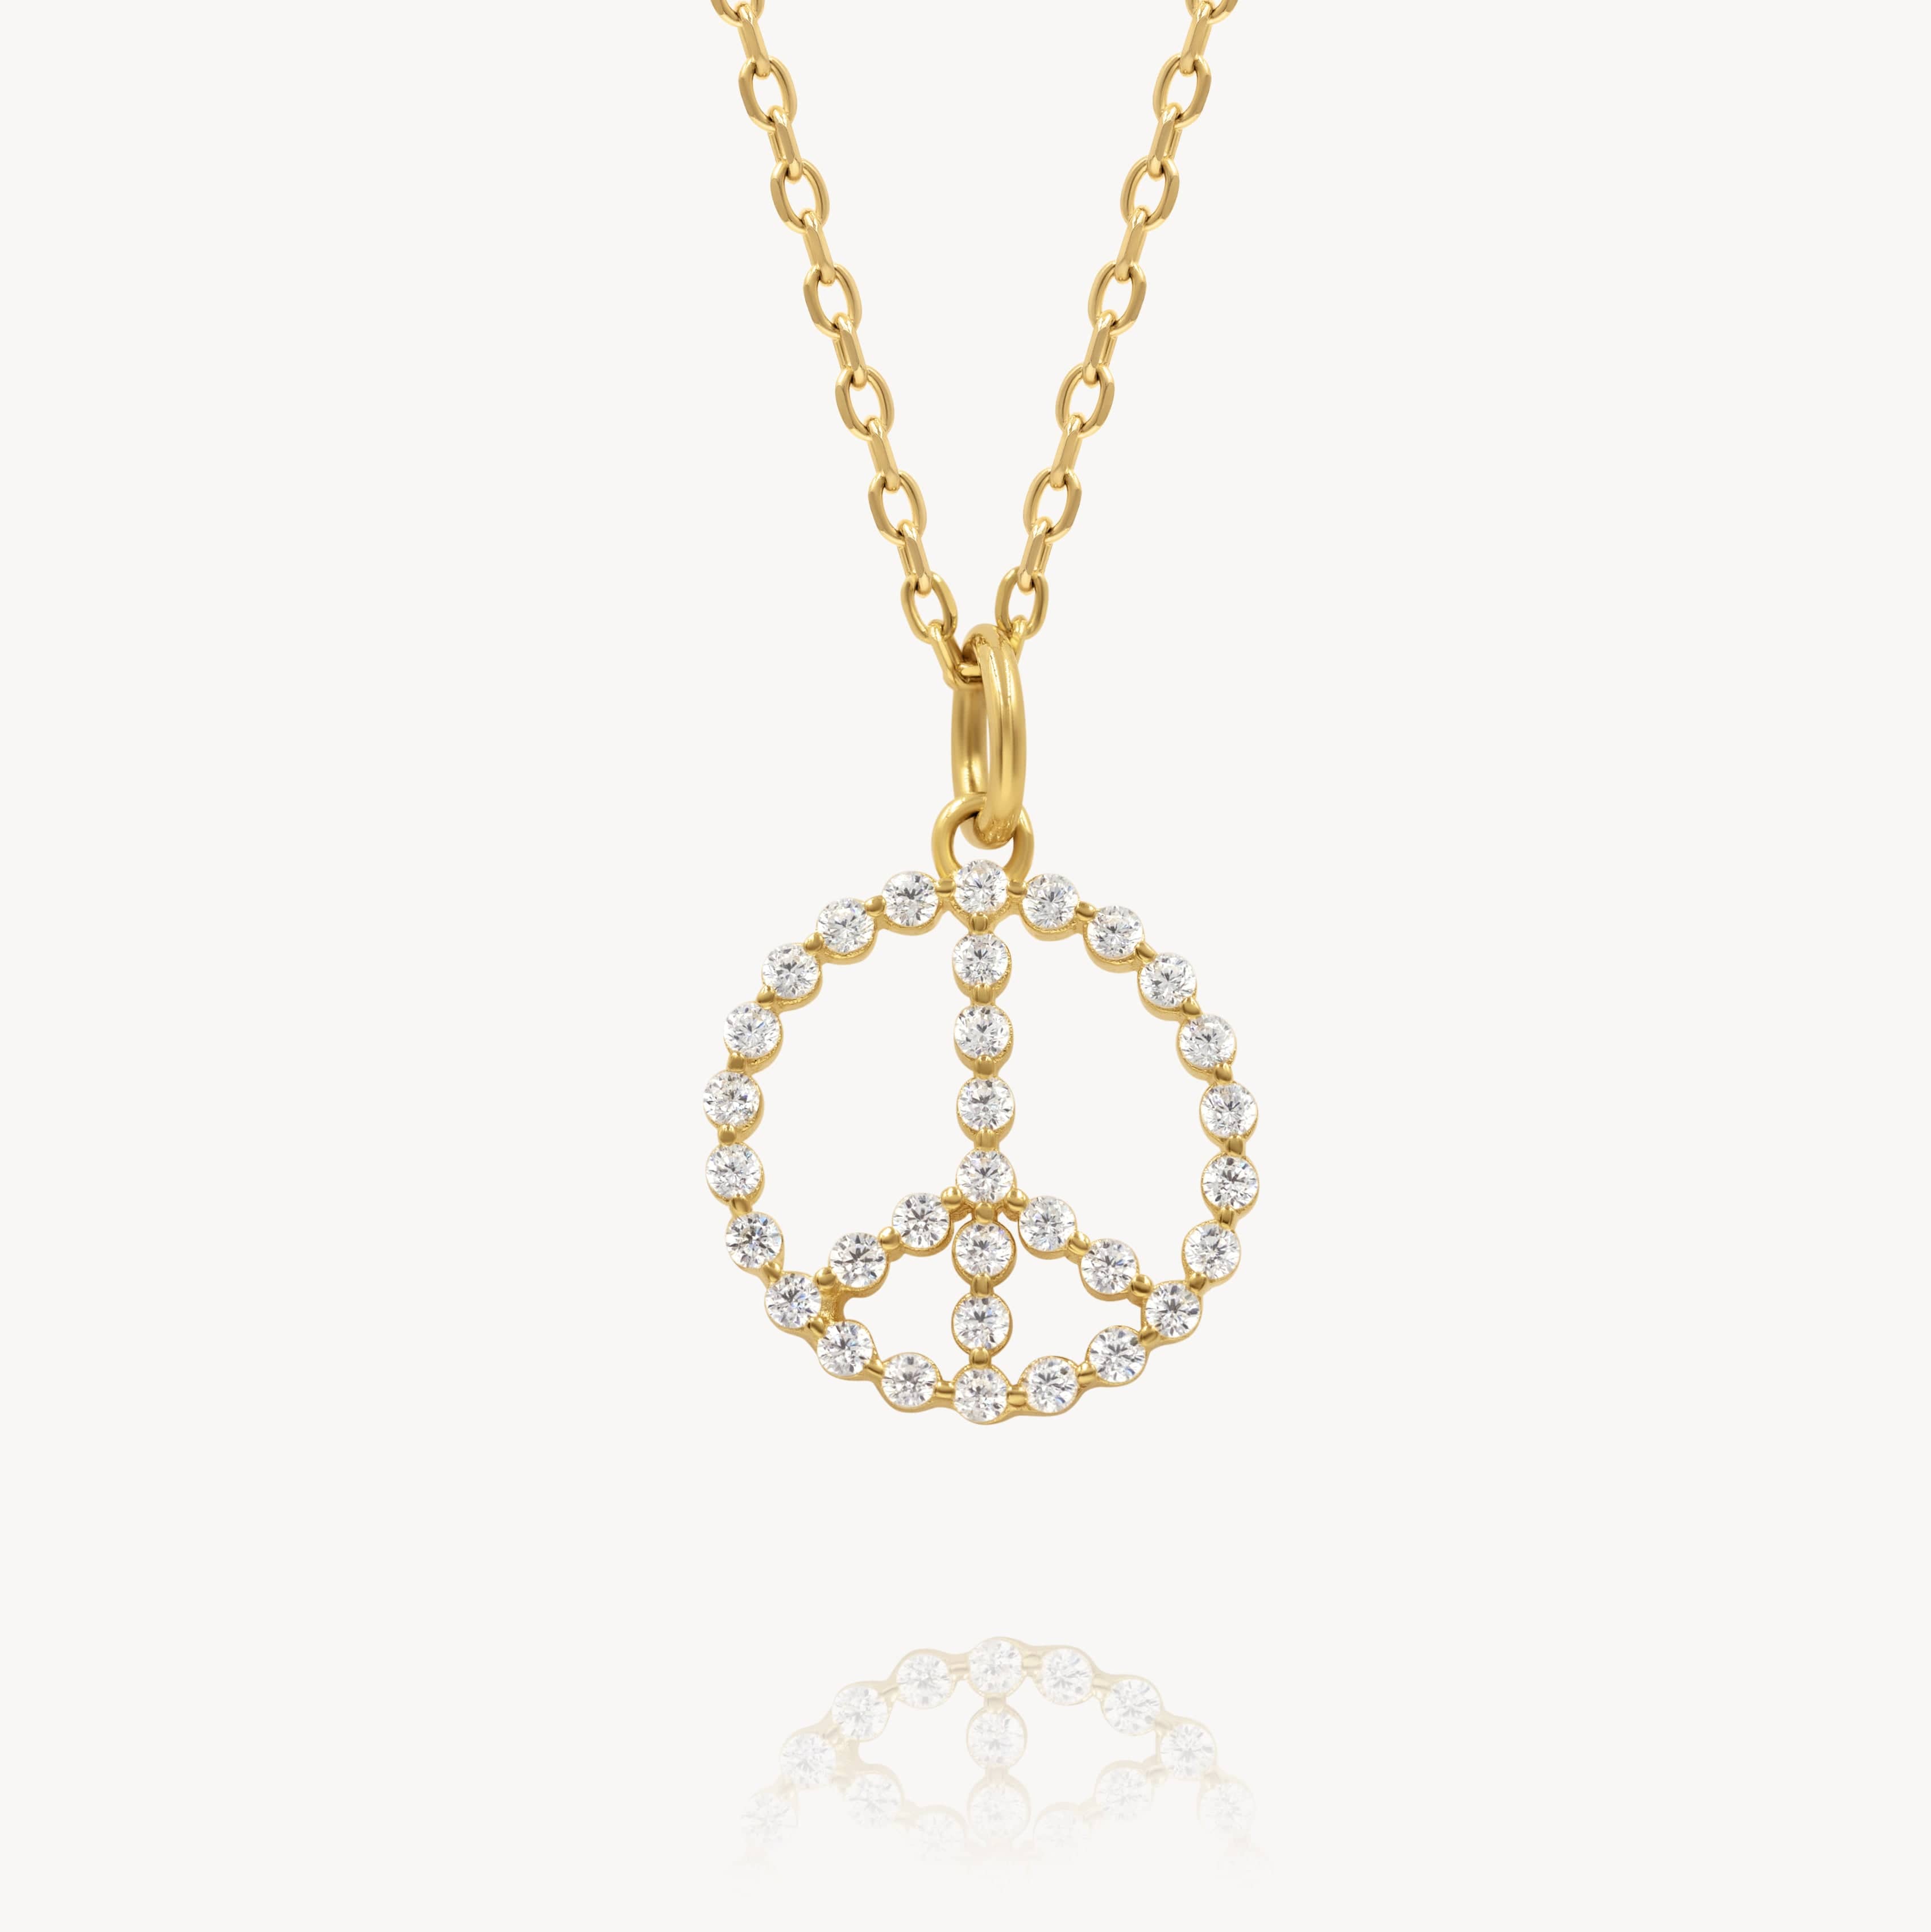 Tiny Peace Sign Necklace - Raiford Gallery Inc